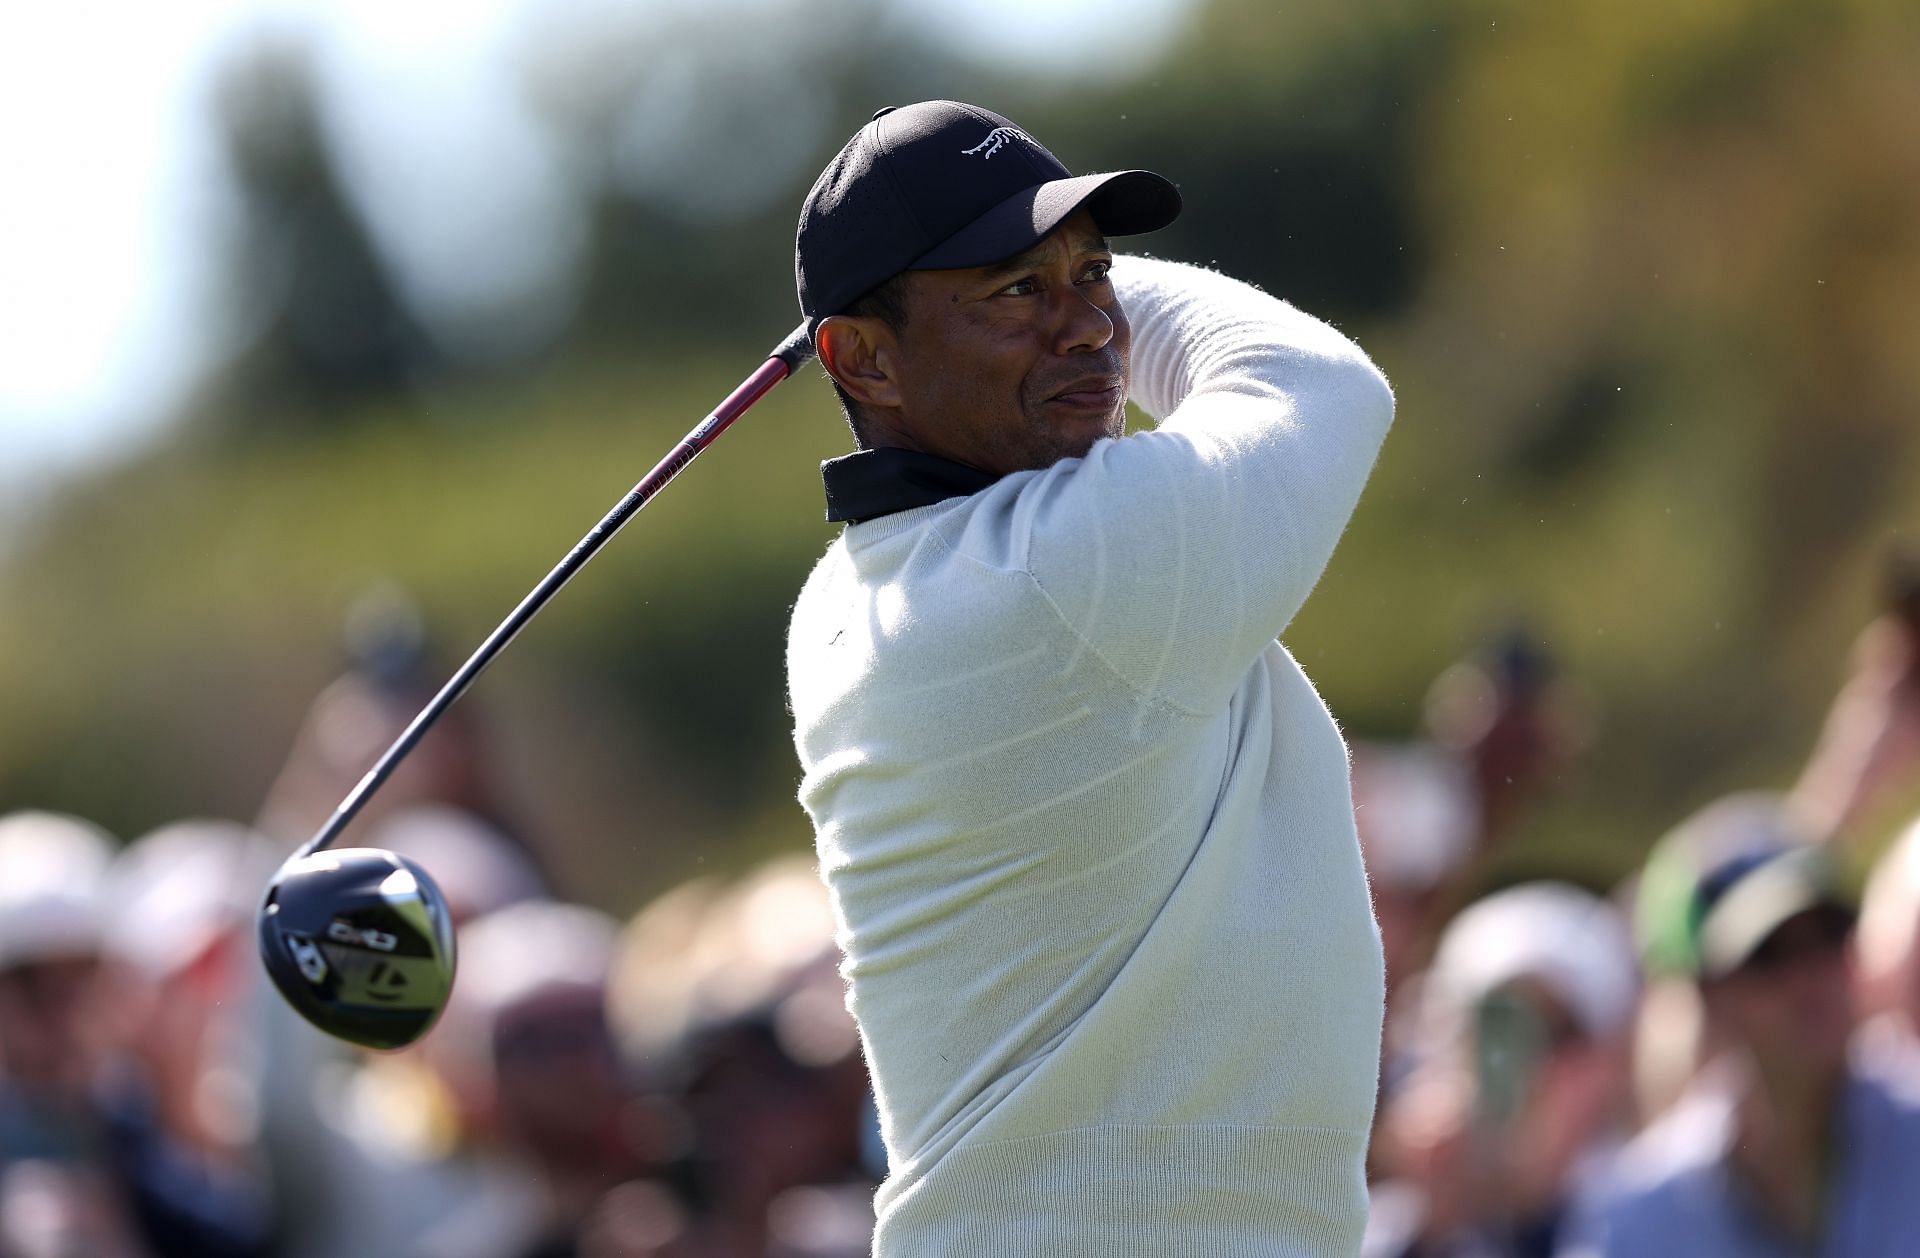 Will Tiger Woods make the Genesis Open projected cut at Riviera